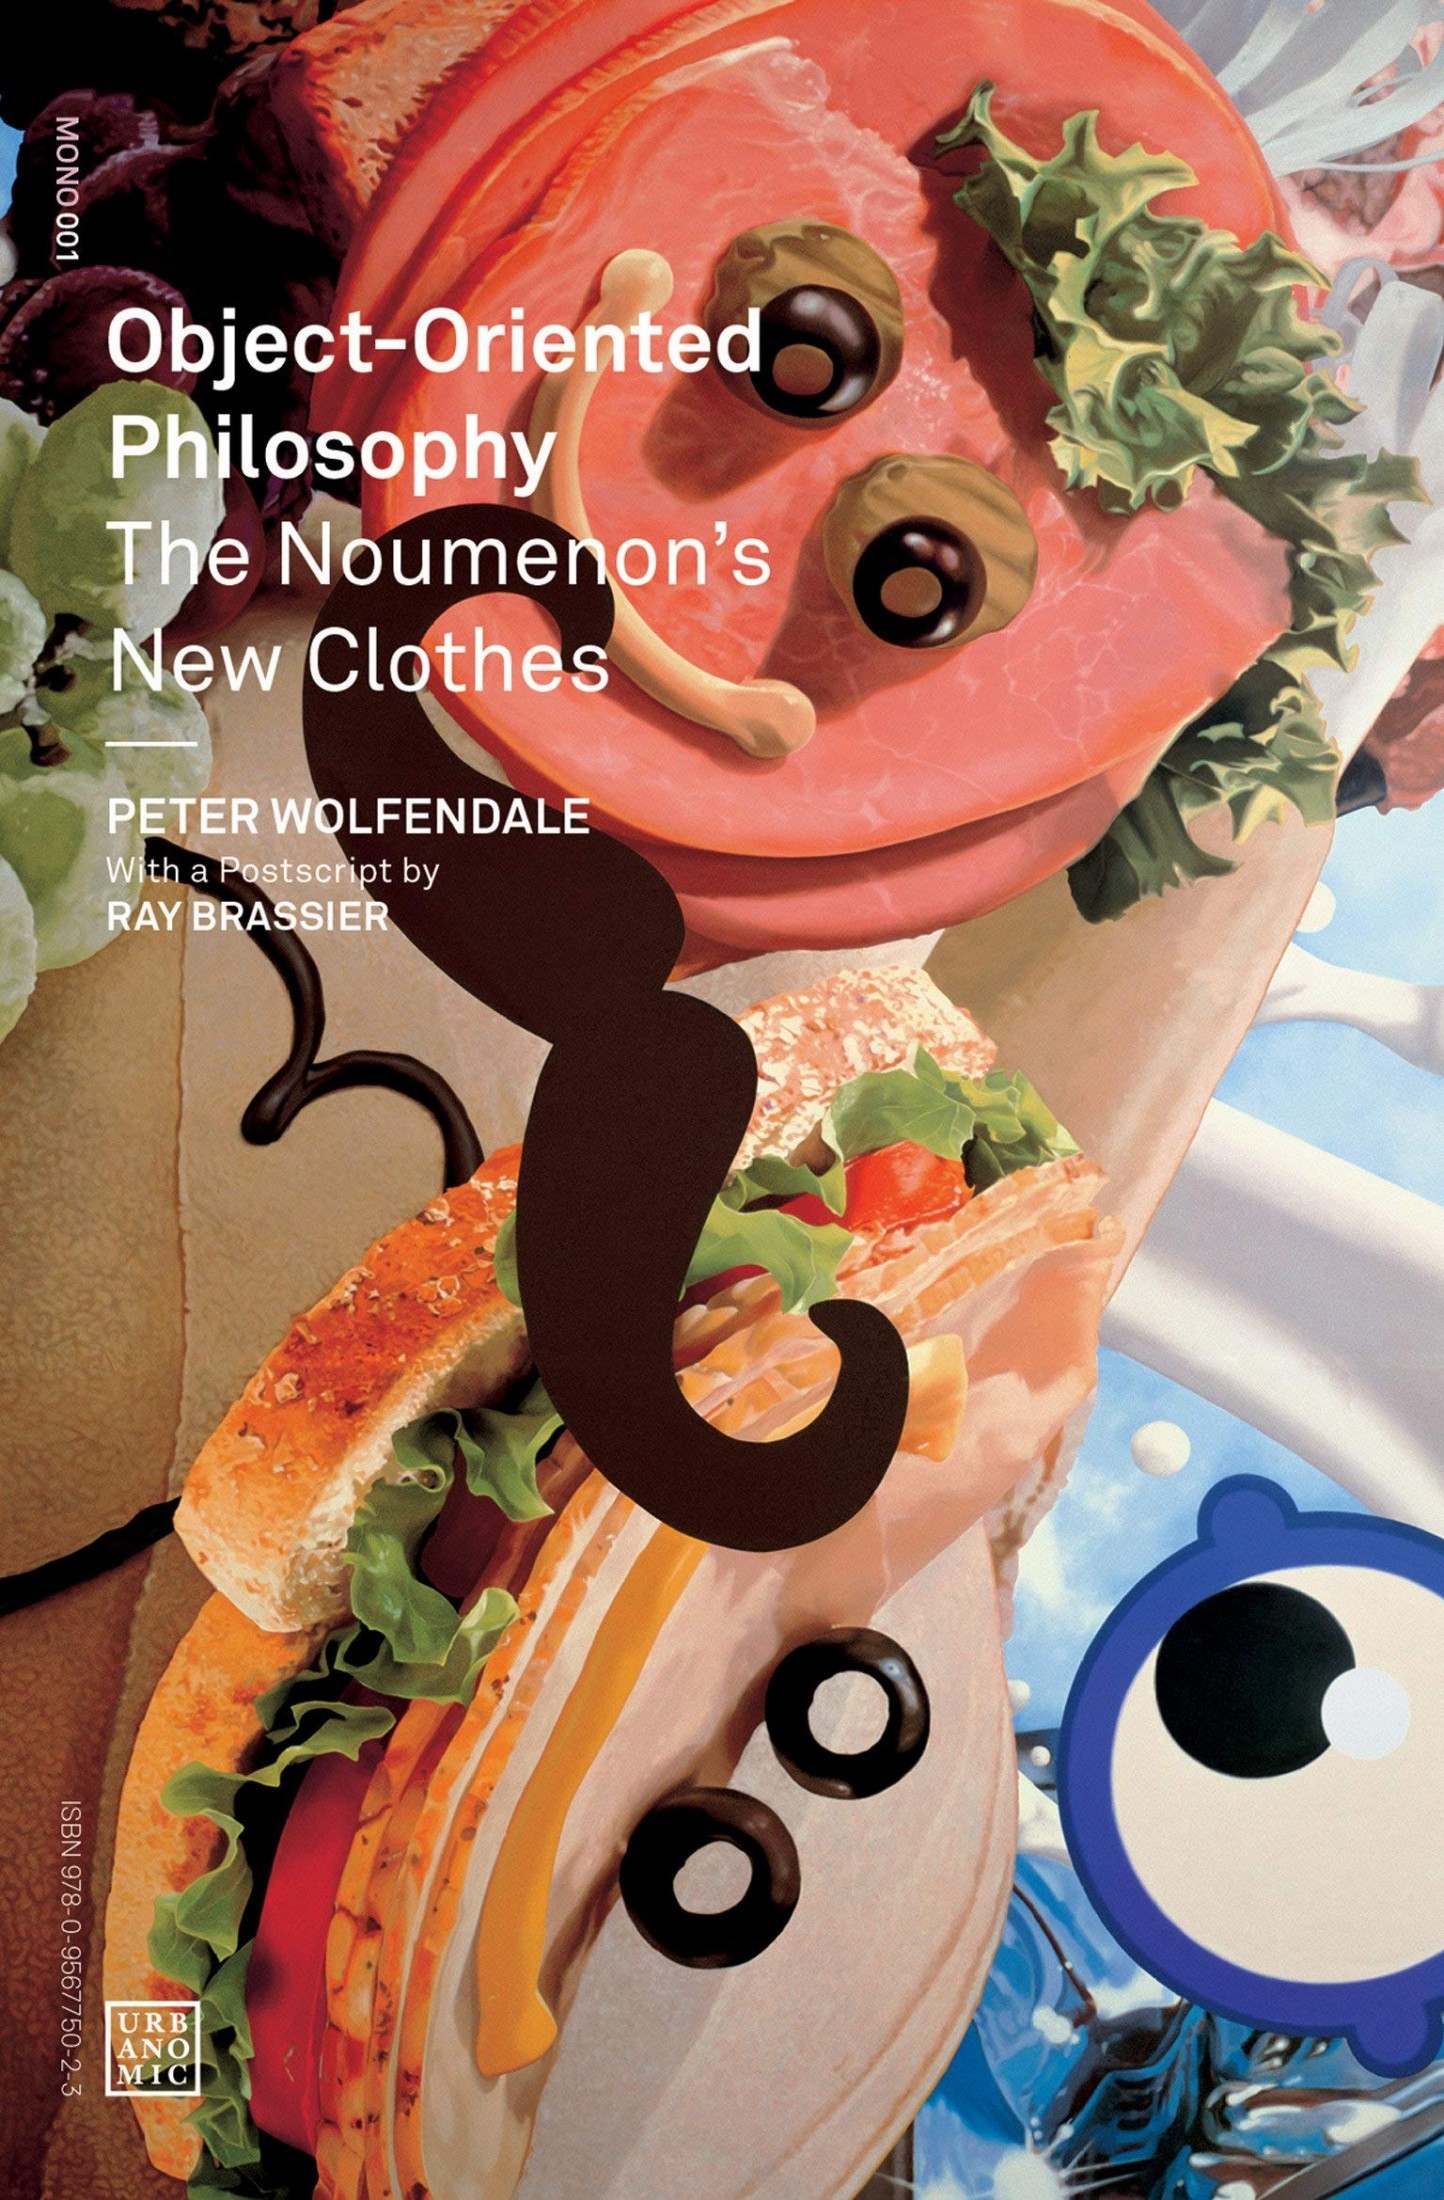 Object-Oriented Philosophy: The Noumenon's New Clothes